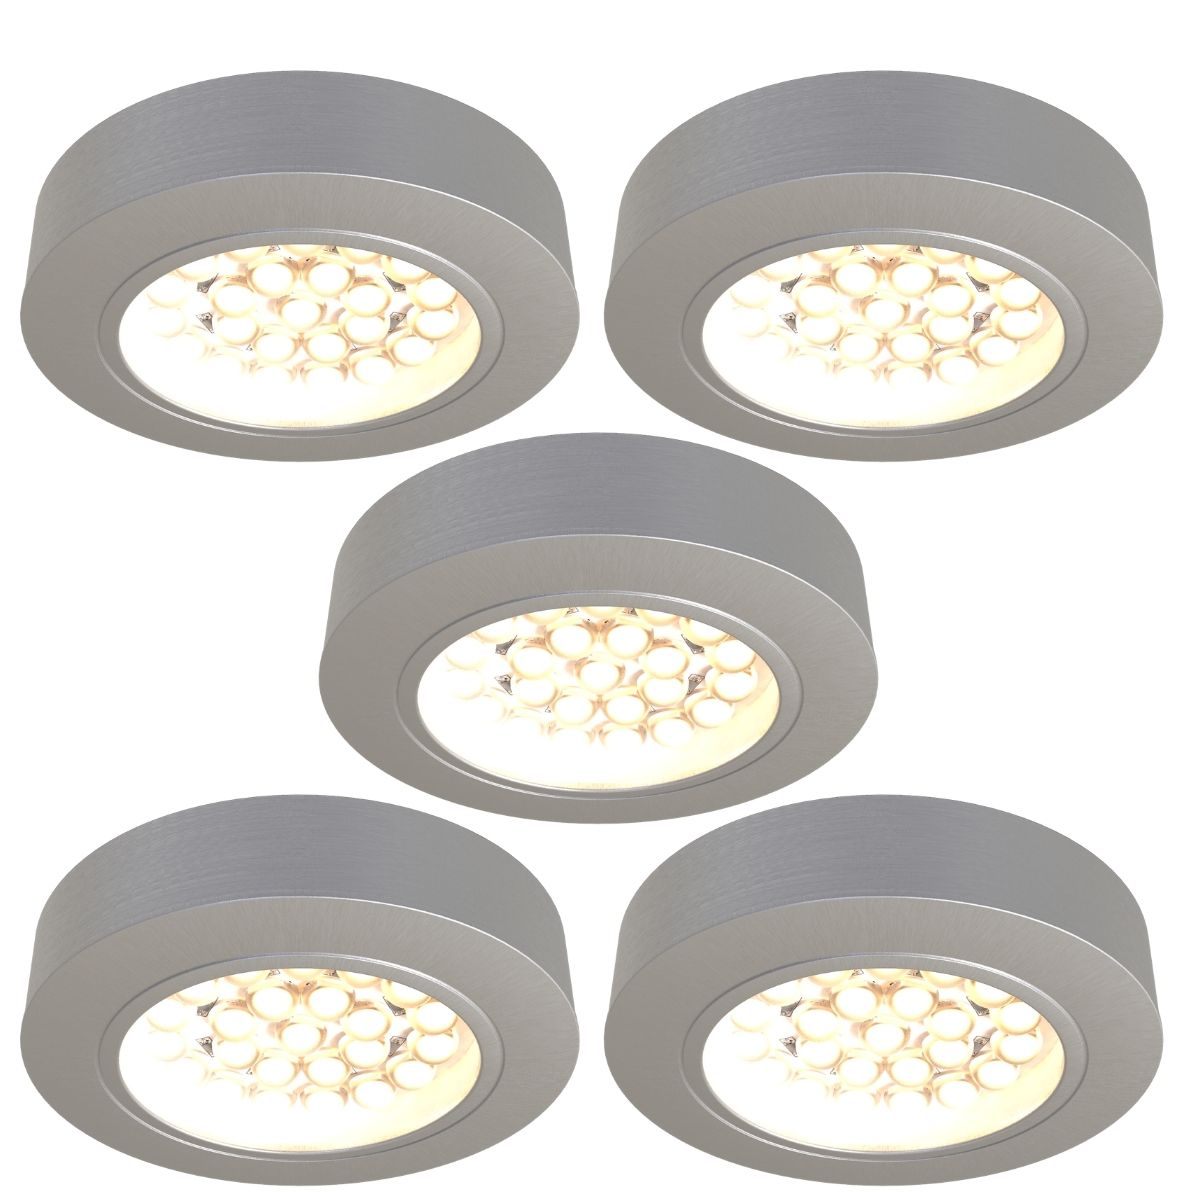 View Pack of 5 Round Surface Mounted LED Under Cabinet Lights With Transformer White or Warm White information